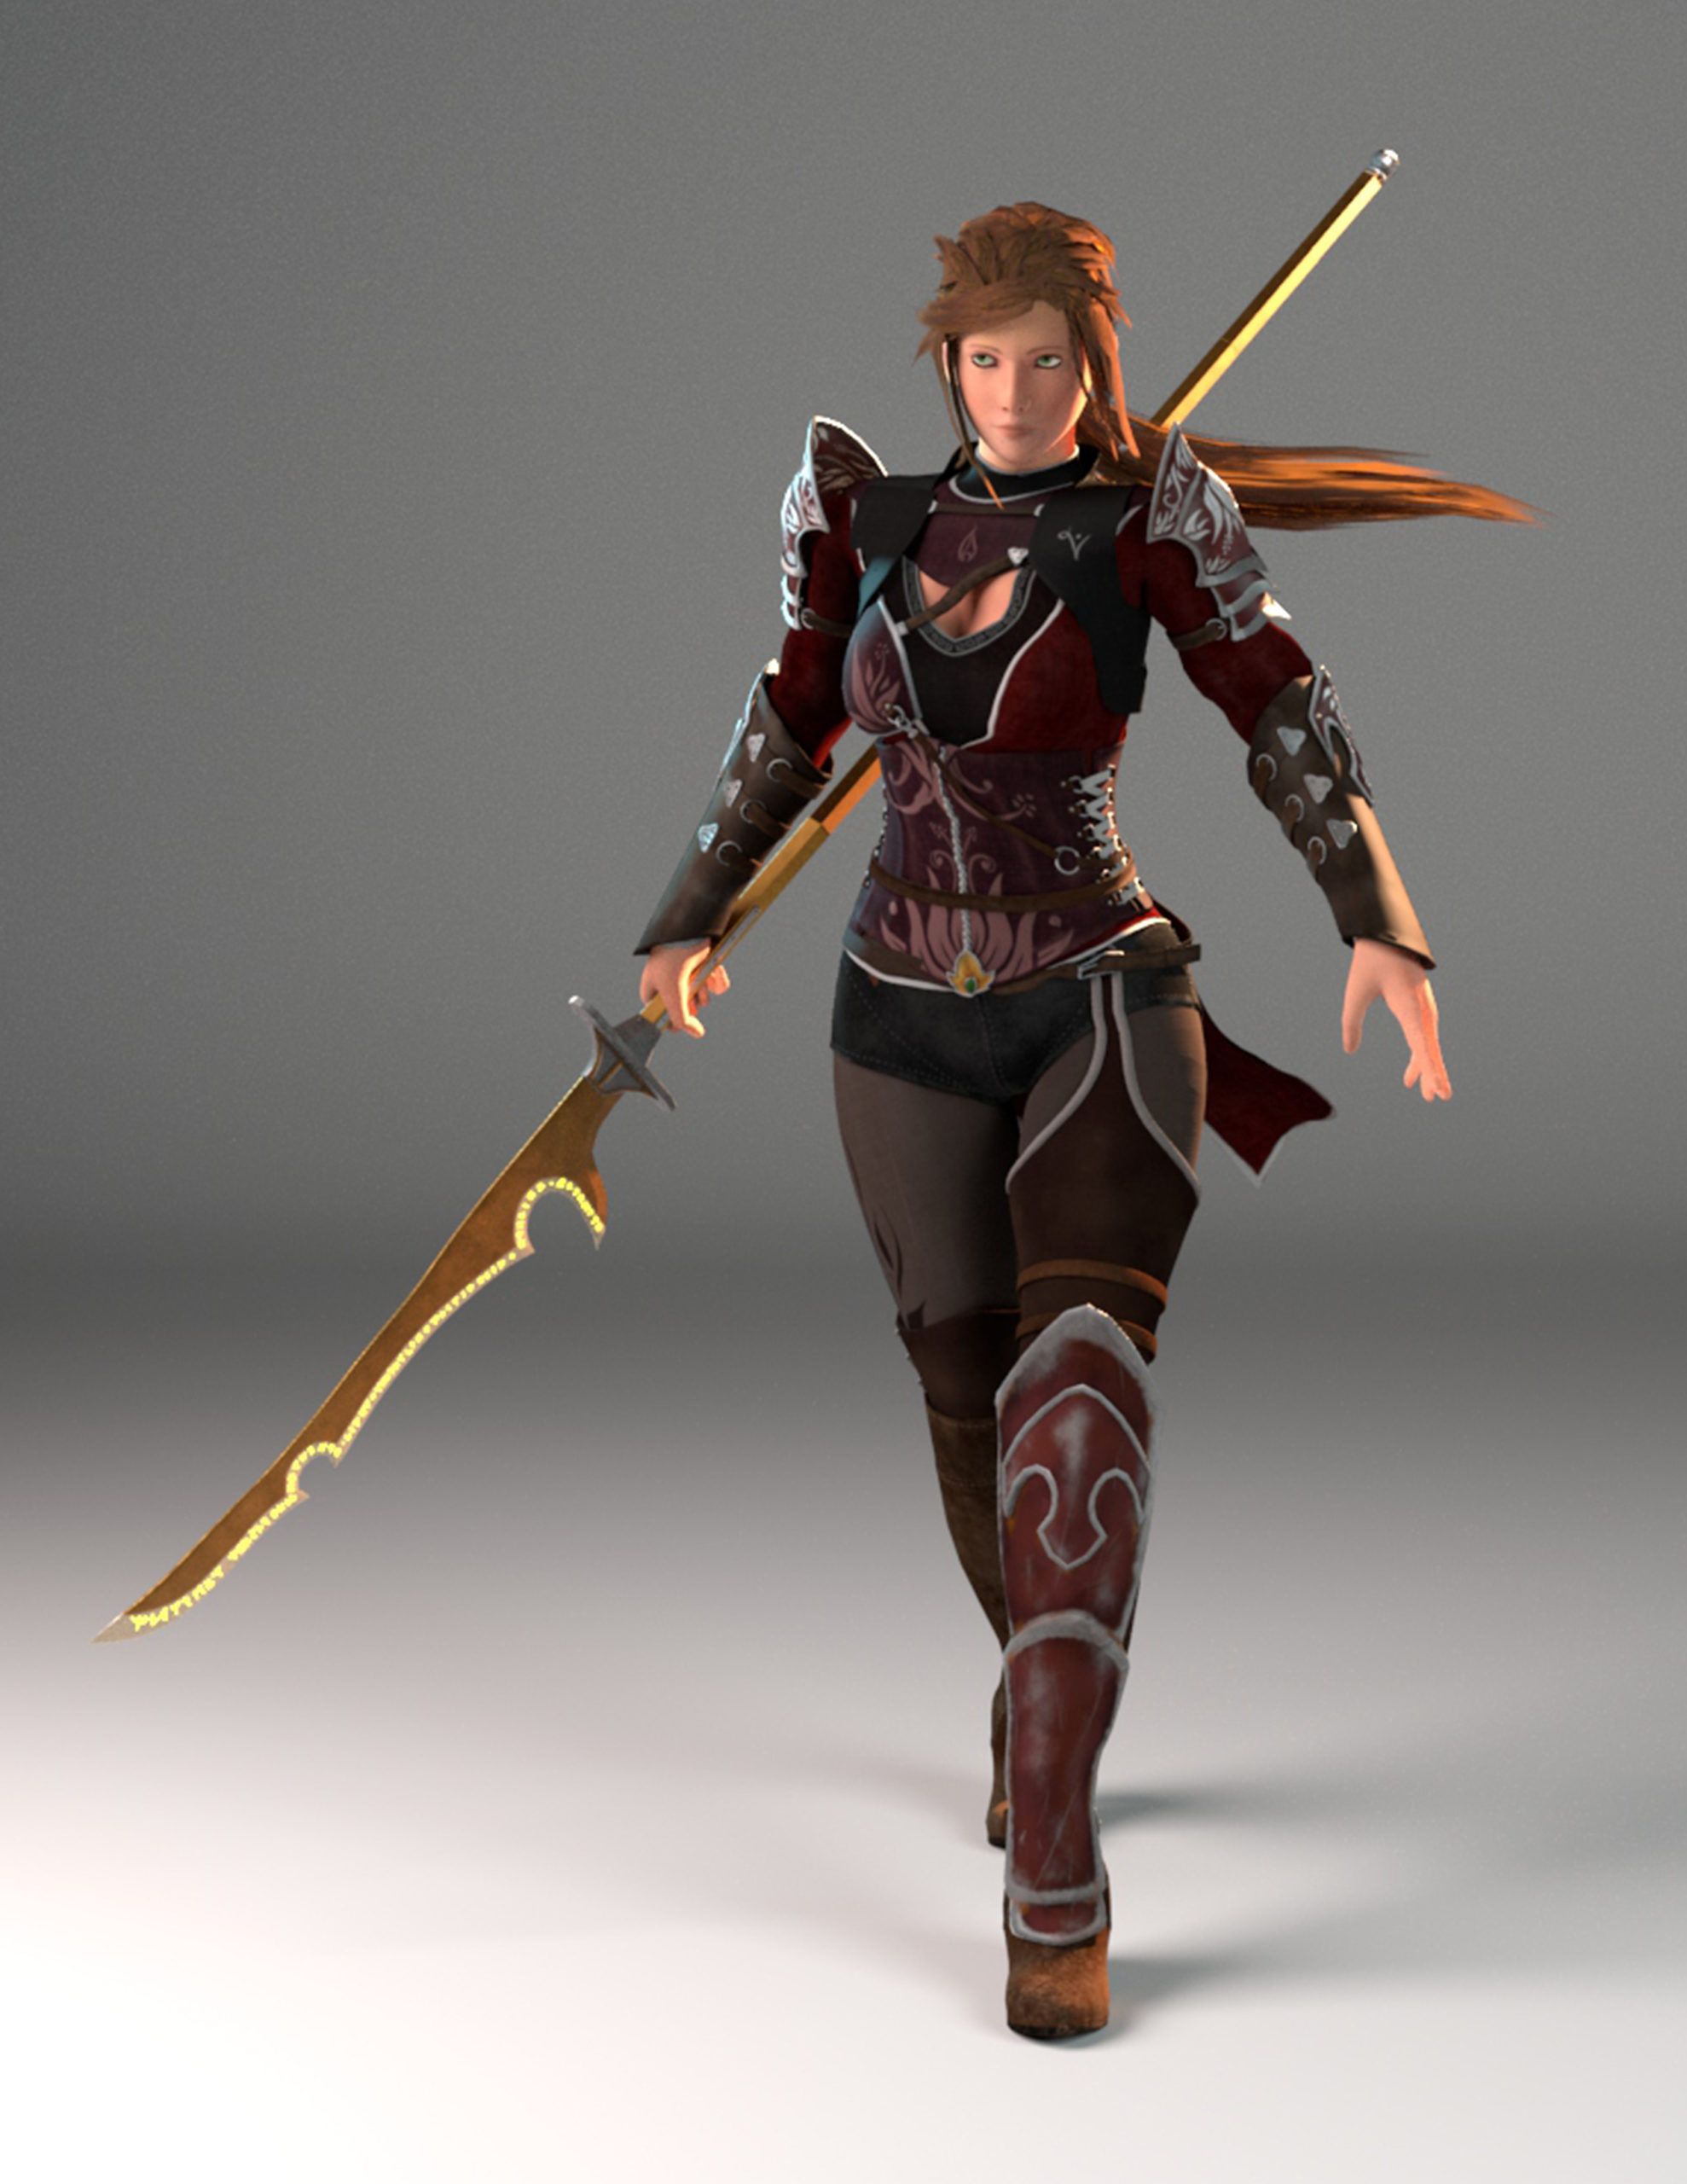 Action figure-like character model wearing armor and holding a spear with a long curved blade on the end